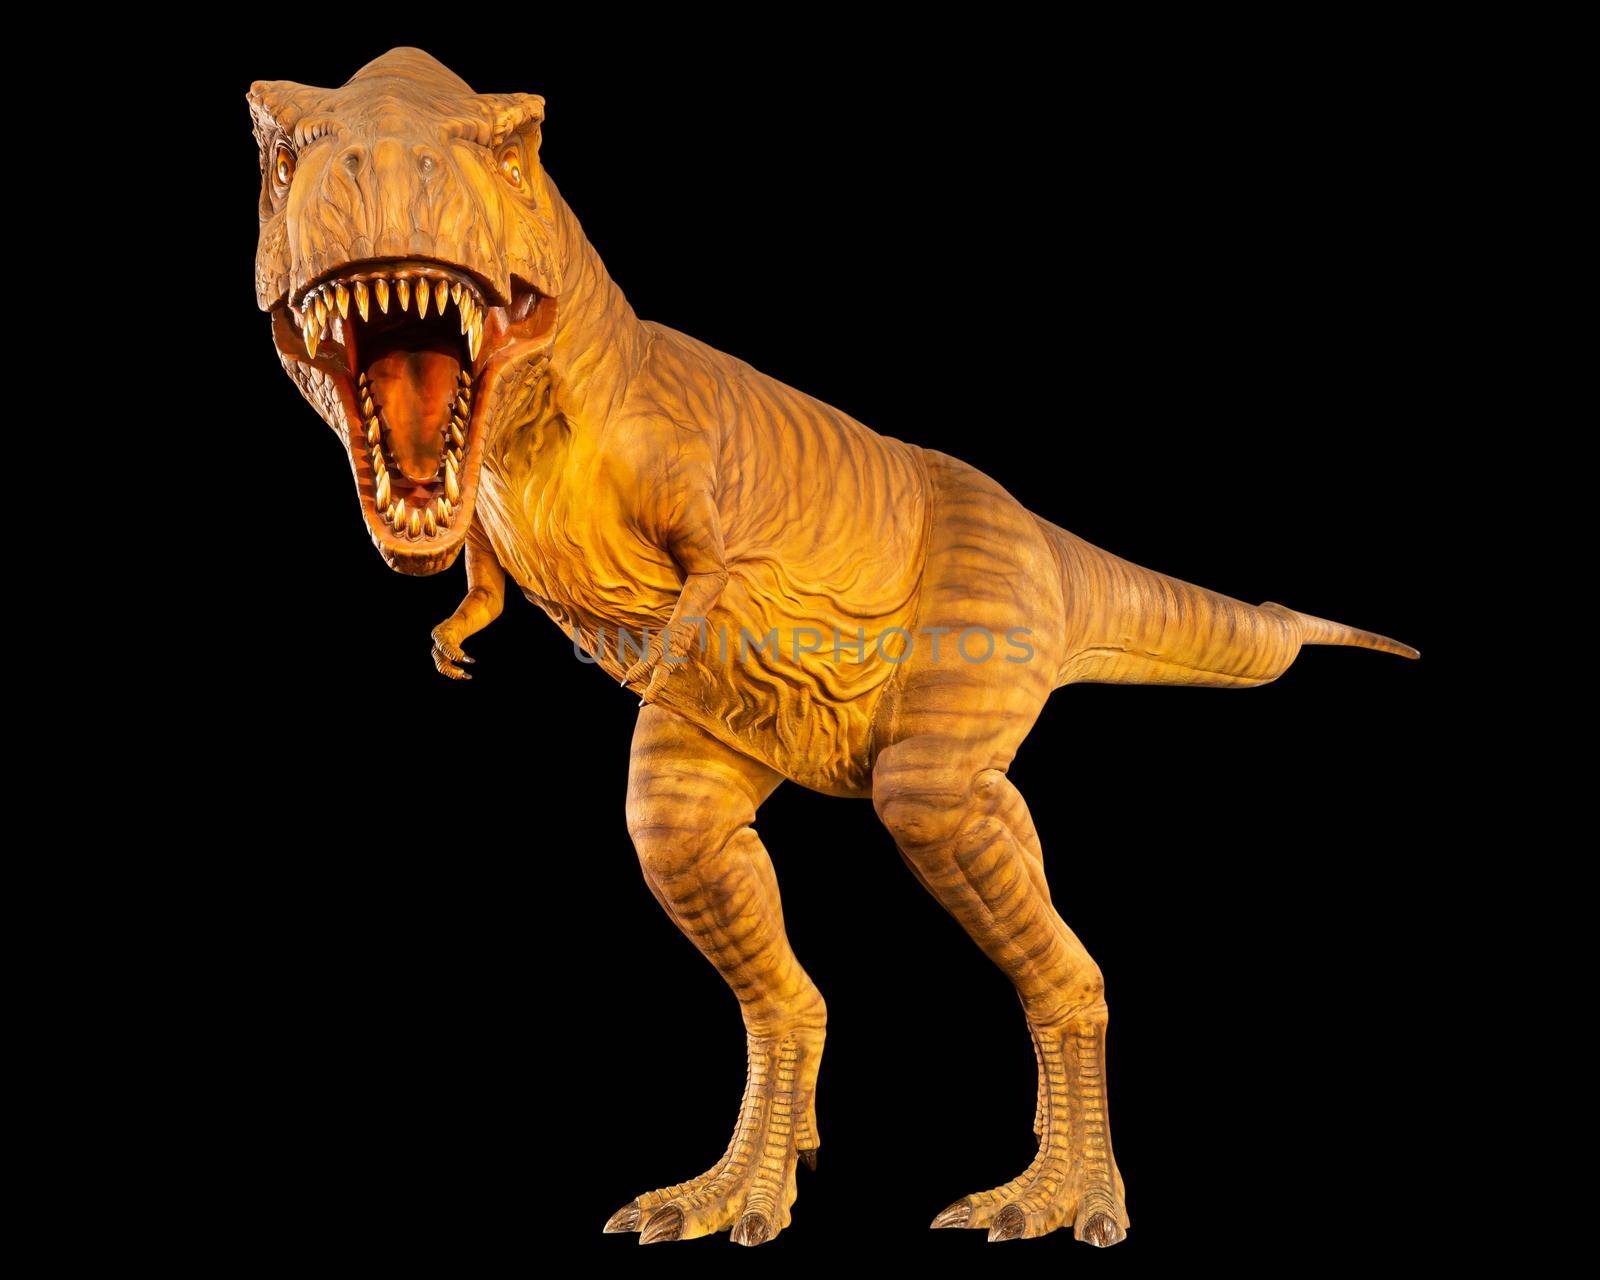 Tyrannosaurus rex ( T-rex ) is walking and open mouth . Front view . Black isolated background . Dinosaur in jurassic peroid . Embedded clipping paths .